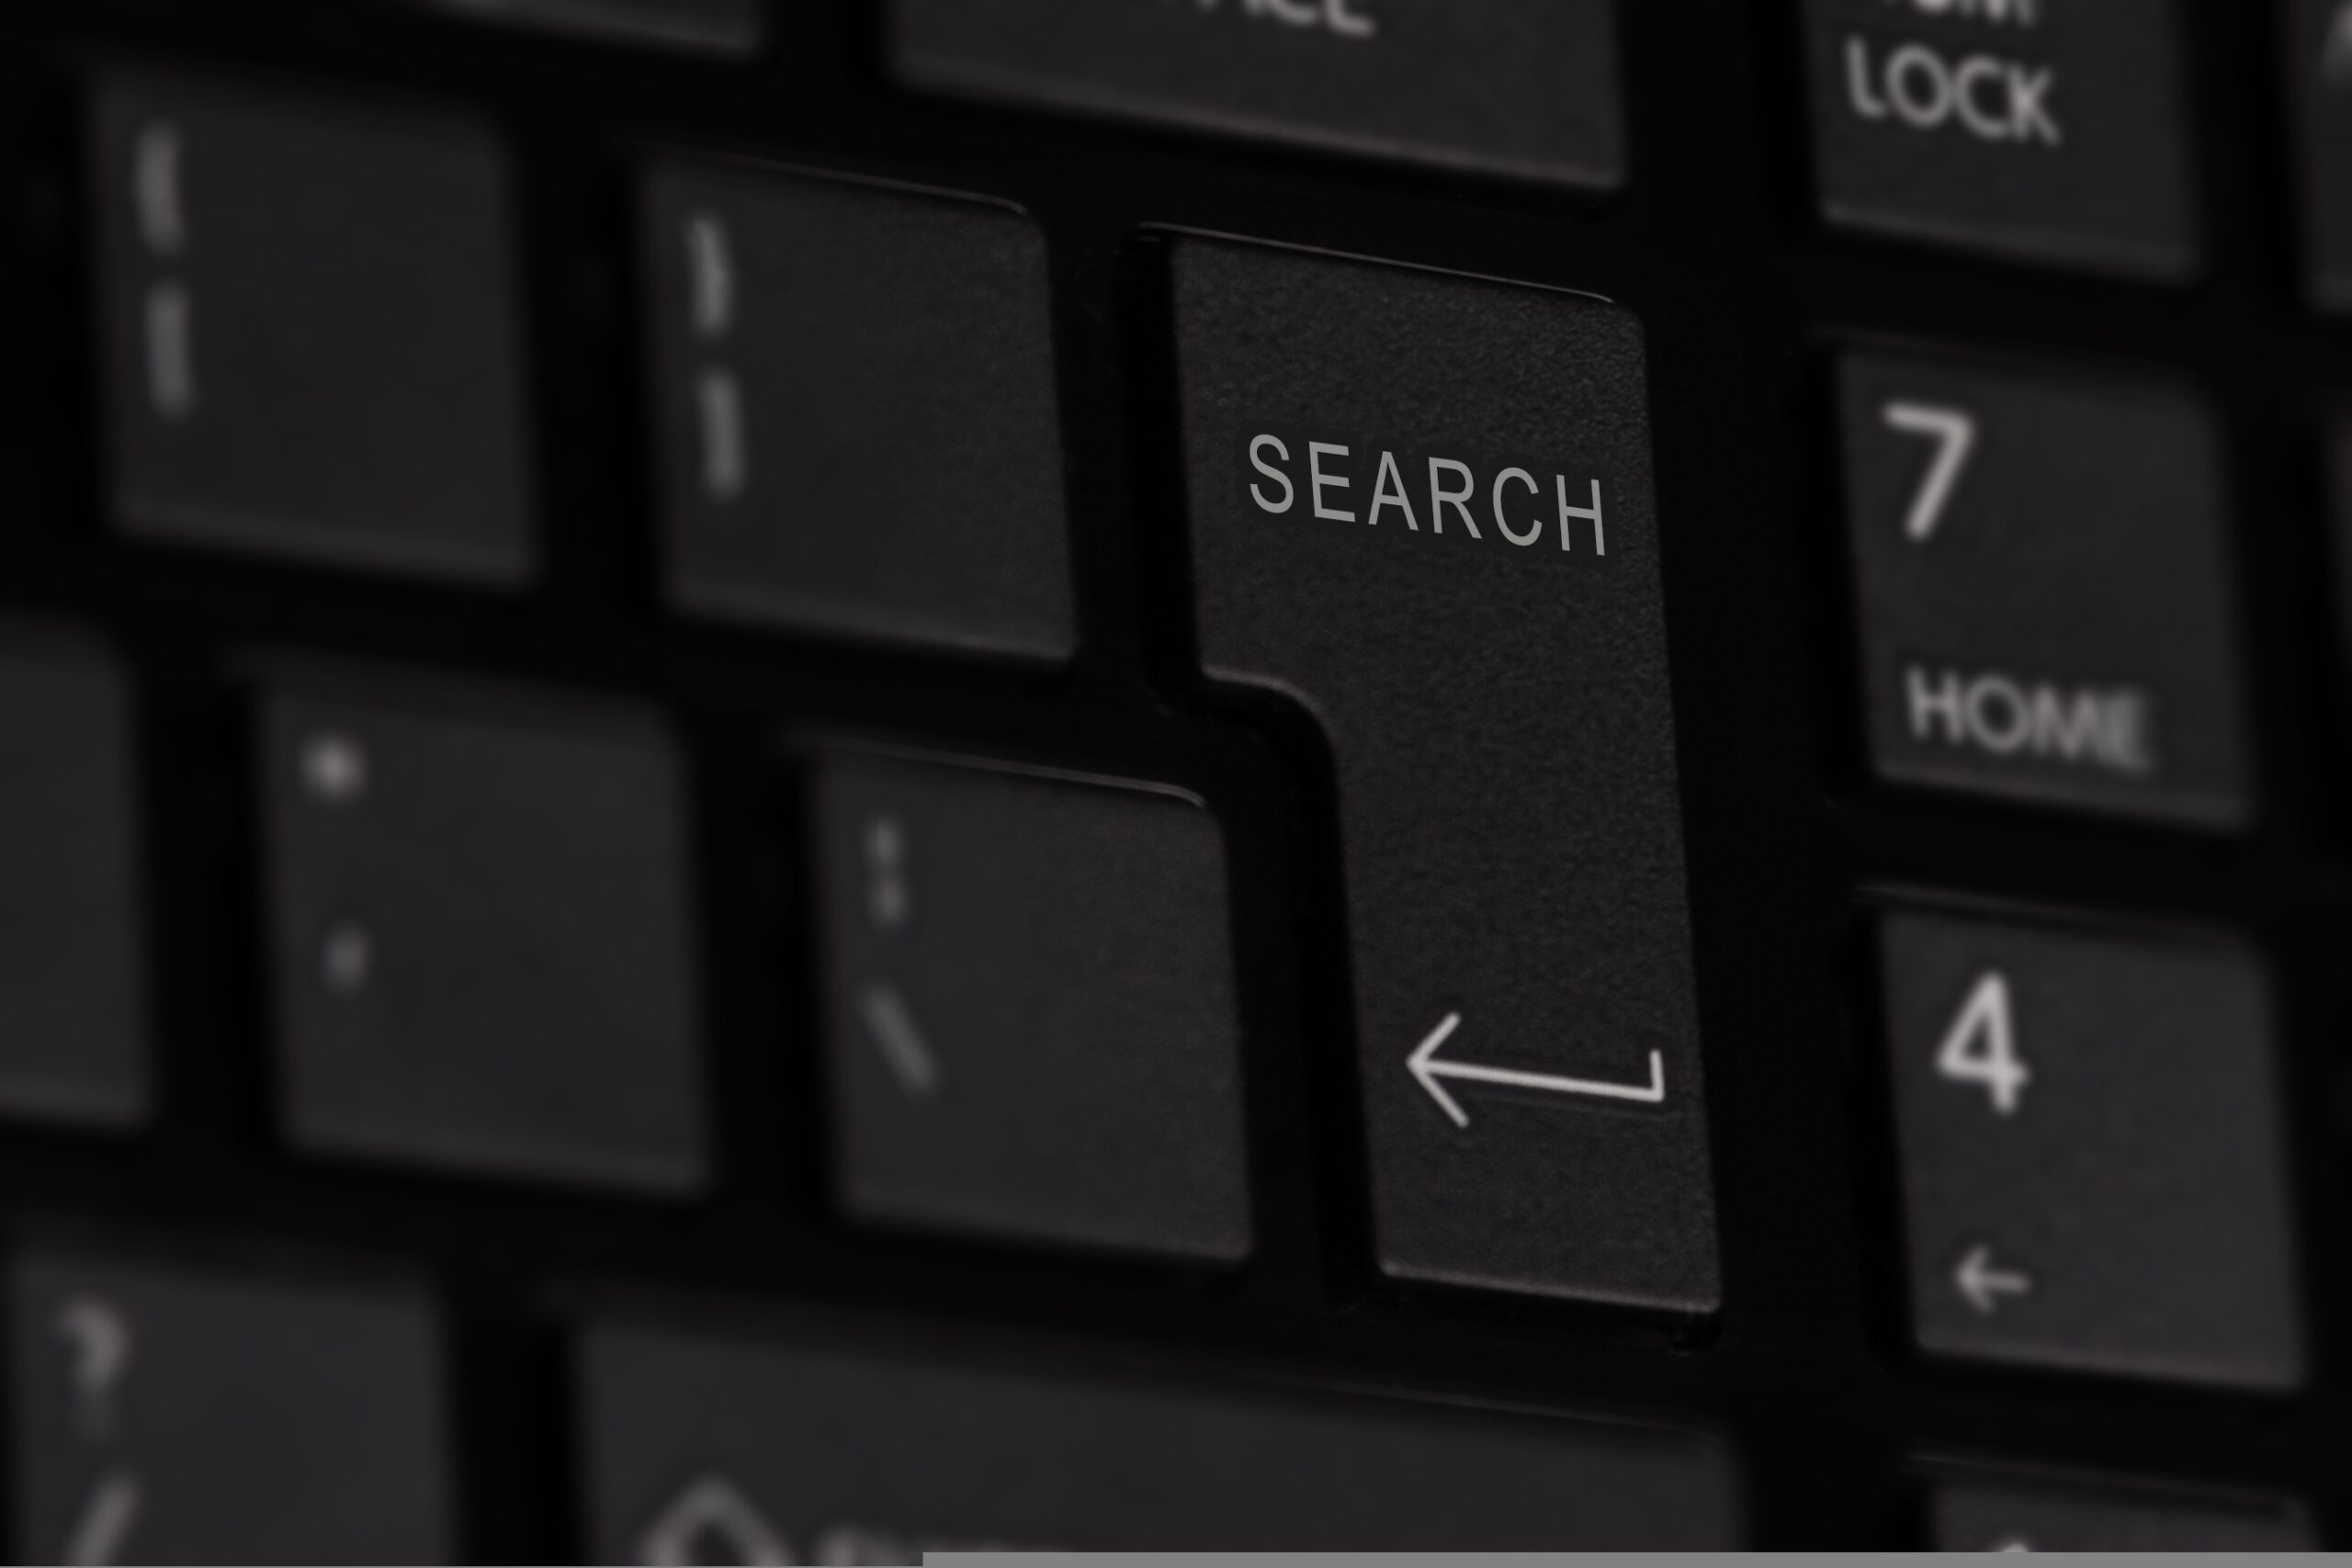 Government appoints £2m firm to help build search tool for citizens’ internet records